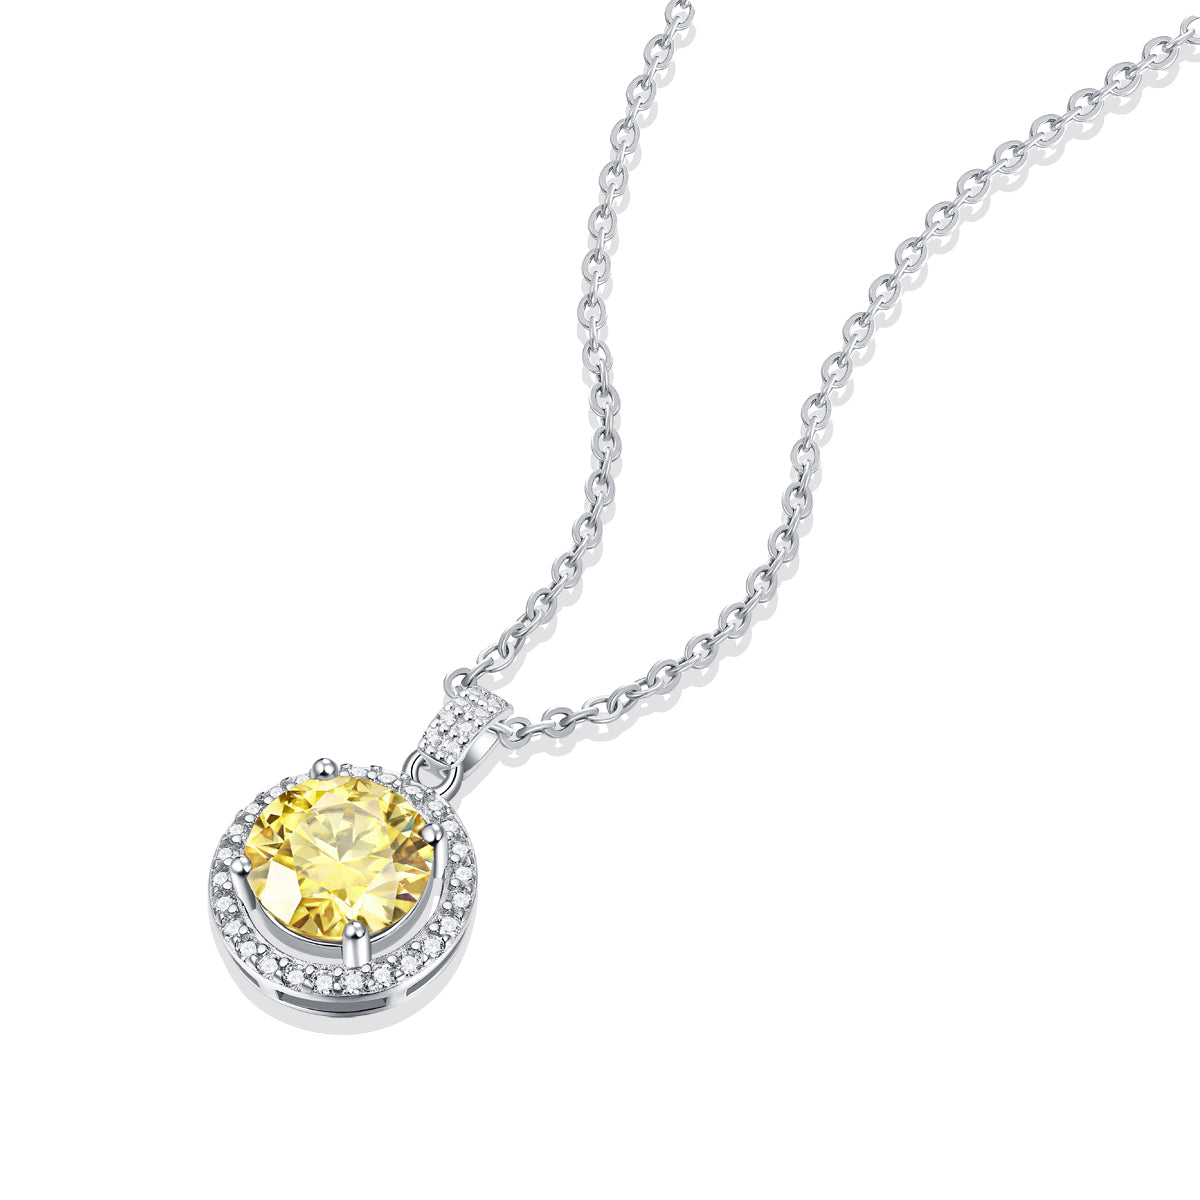 S925 Silver Adjustable Moissanite luxury inlaid round cake necklace P9373-6.5